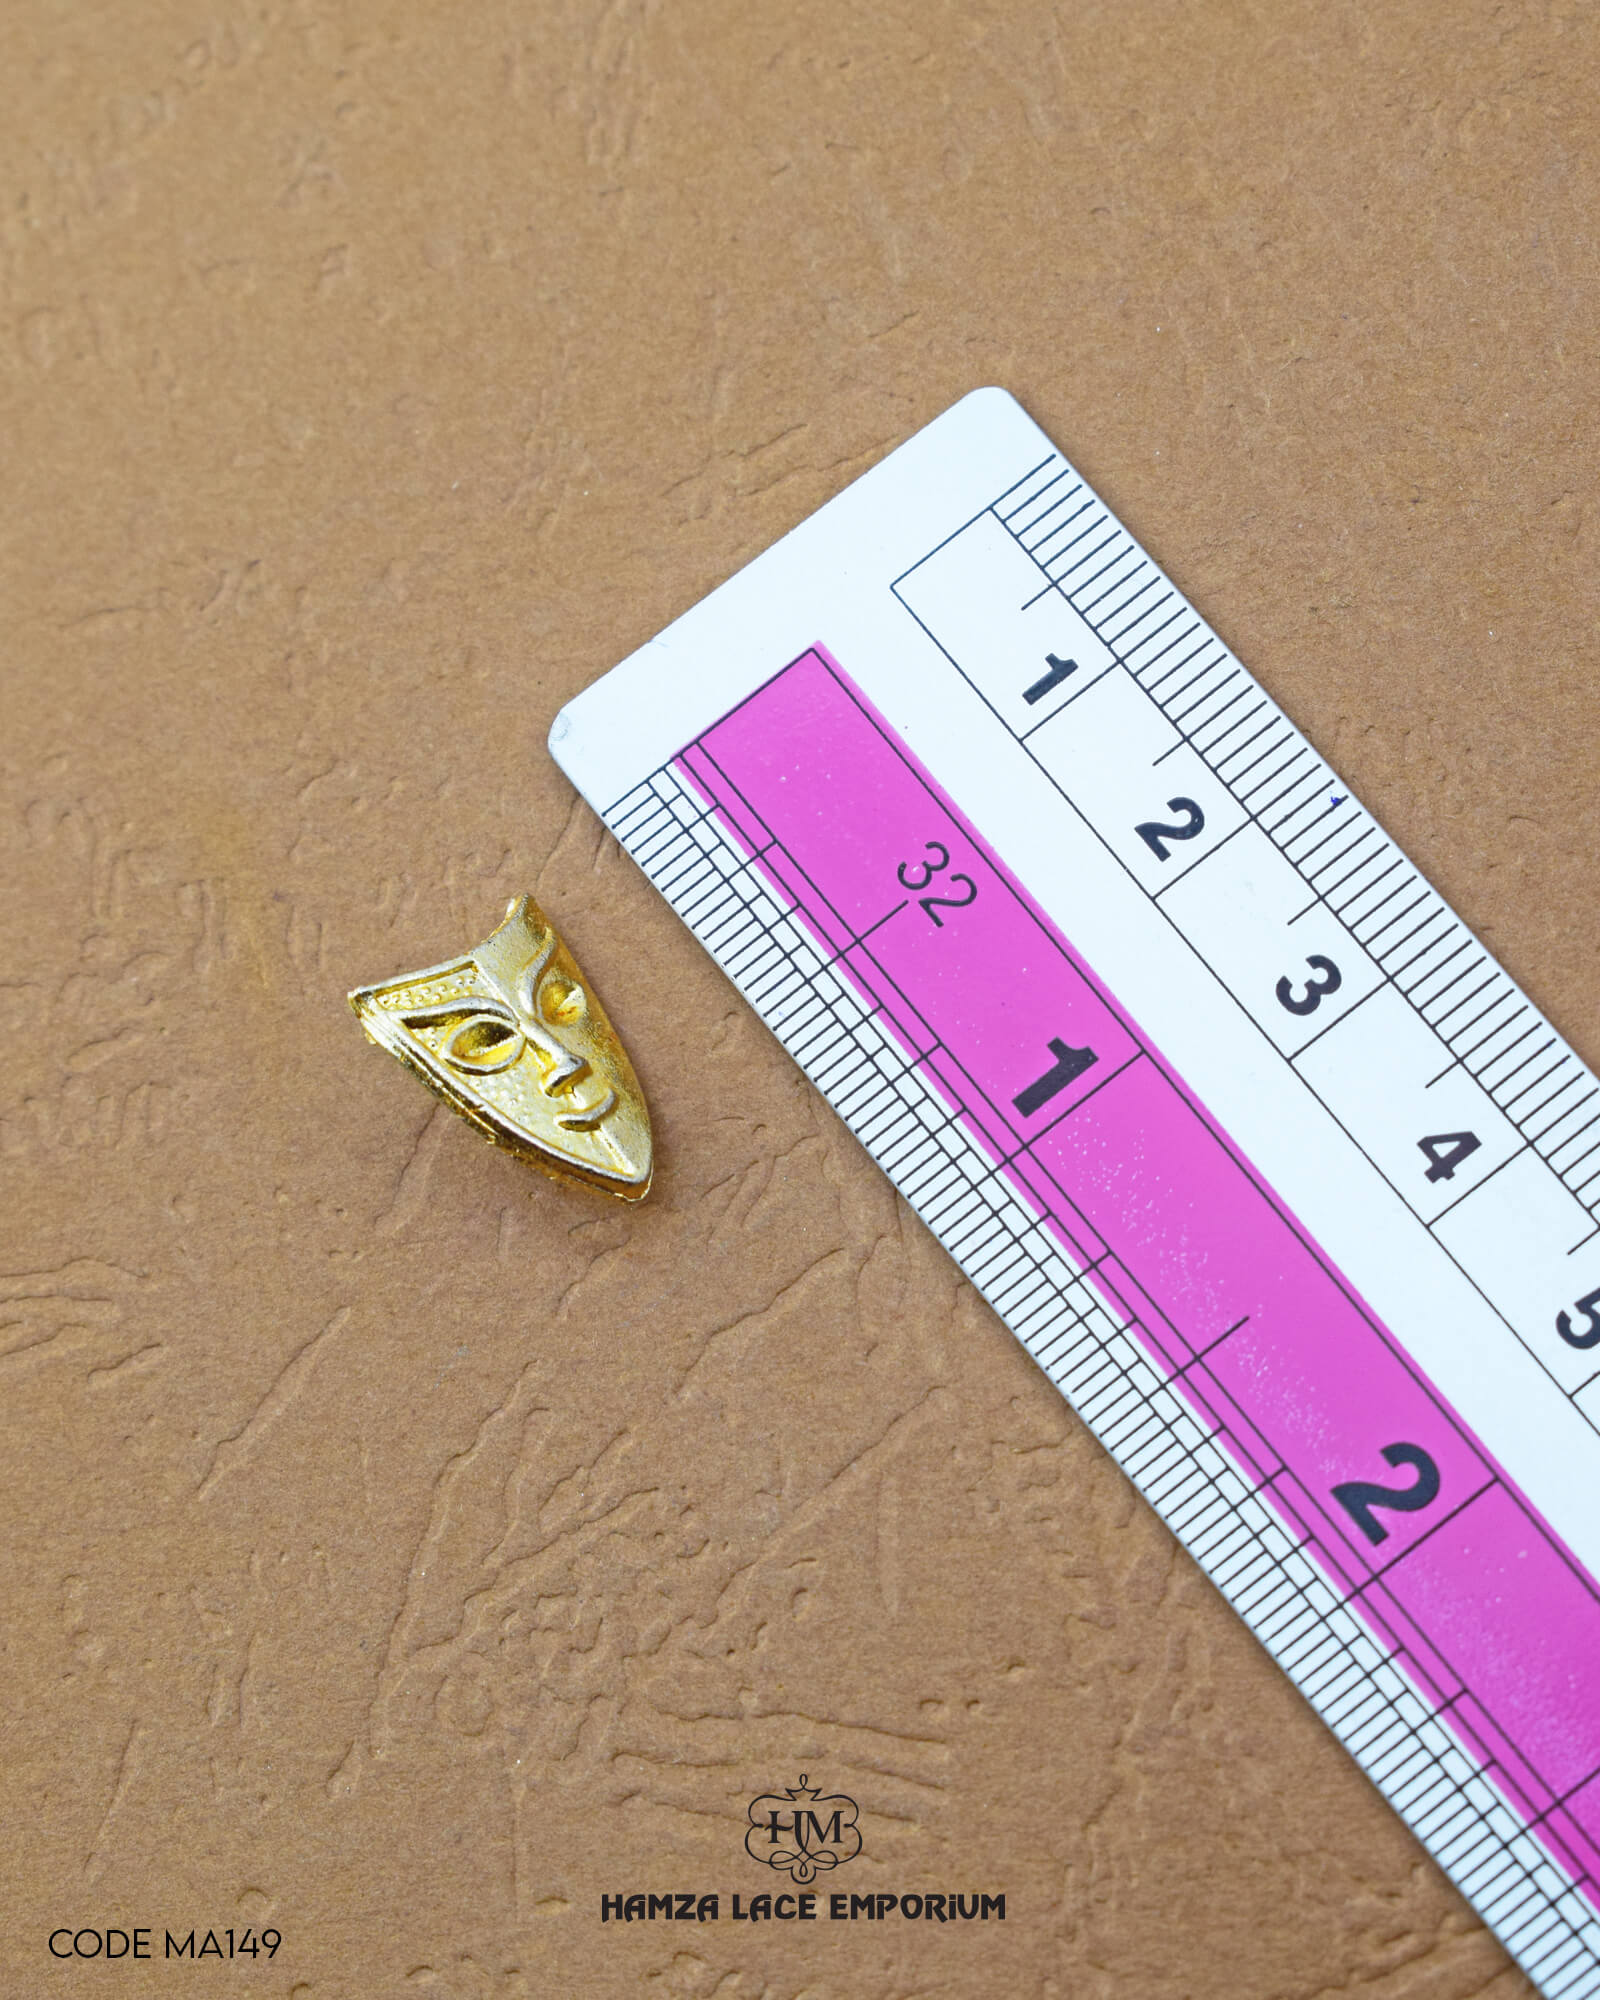 Elegant 'Metal Accessories MA149' for Clothing (Size shown with ruler)